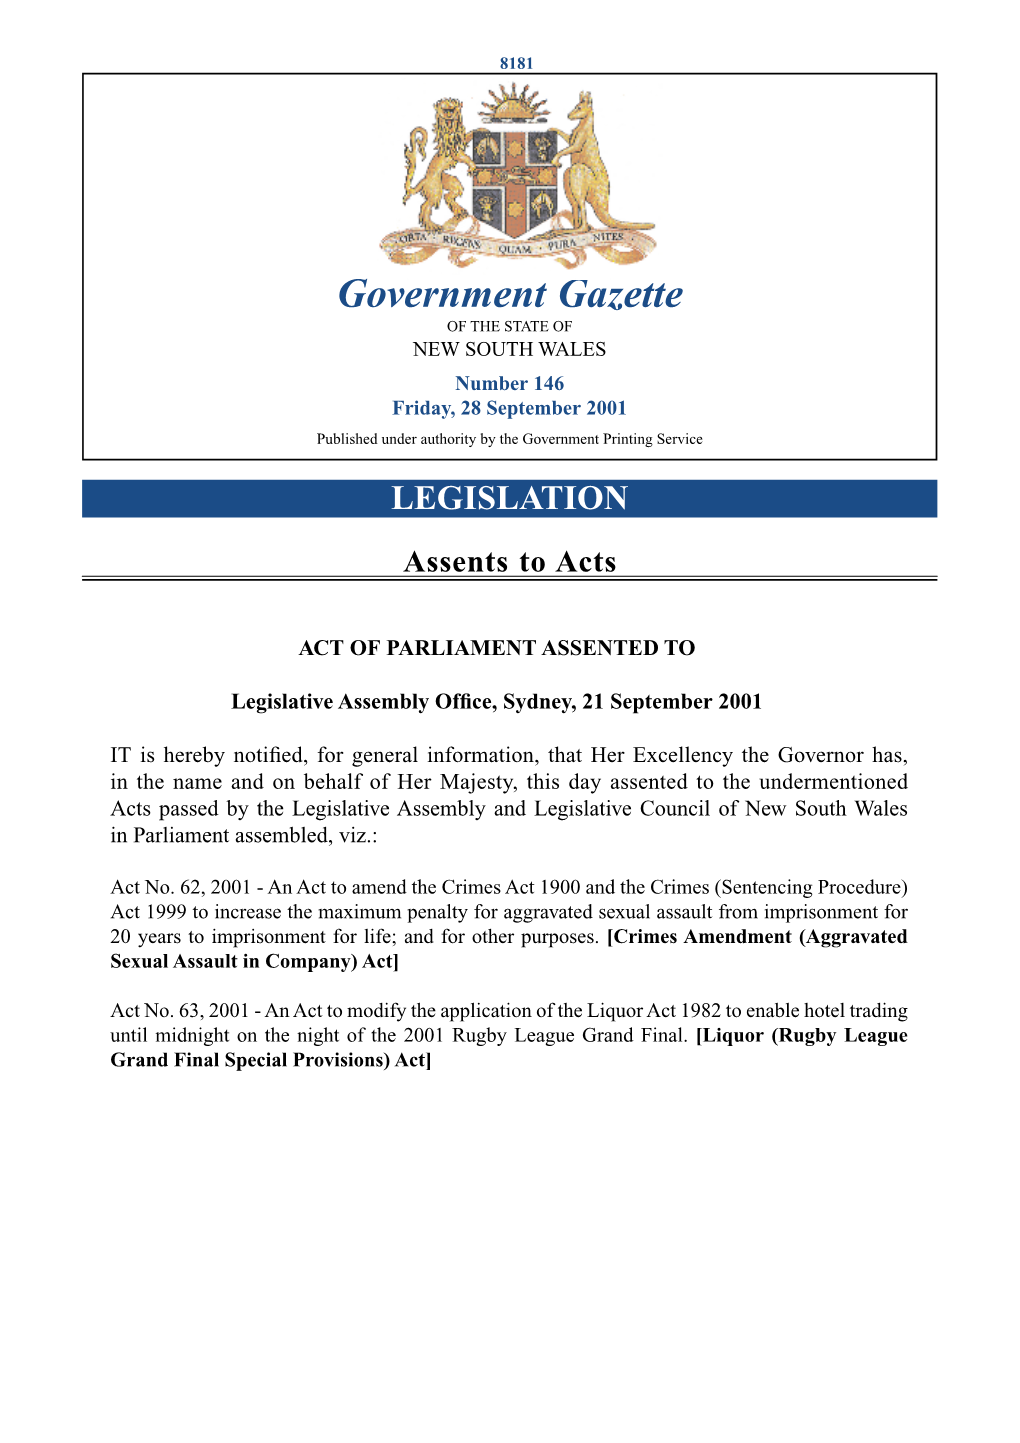 Government Gazette of the STATE of NEW SOUTH WALES Number 146 Friday, 28 September 2001 Published Under Authority by the Government Printing Service